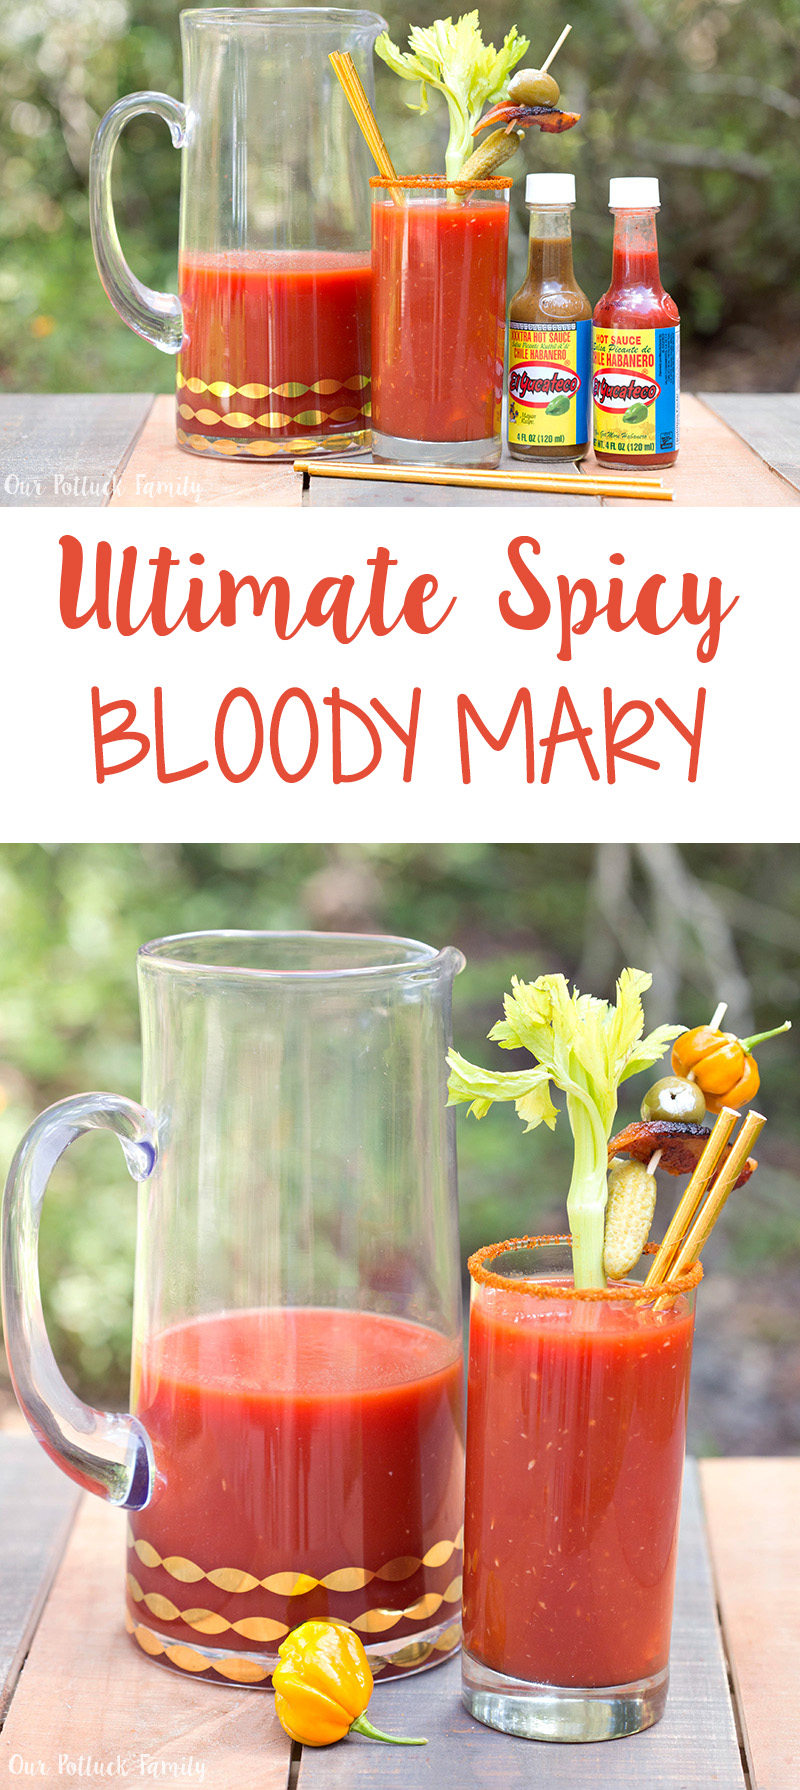 Ultimate Spicy Bloody Mary - Our Potluck Family